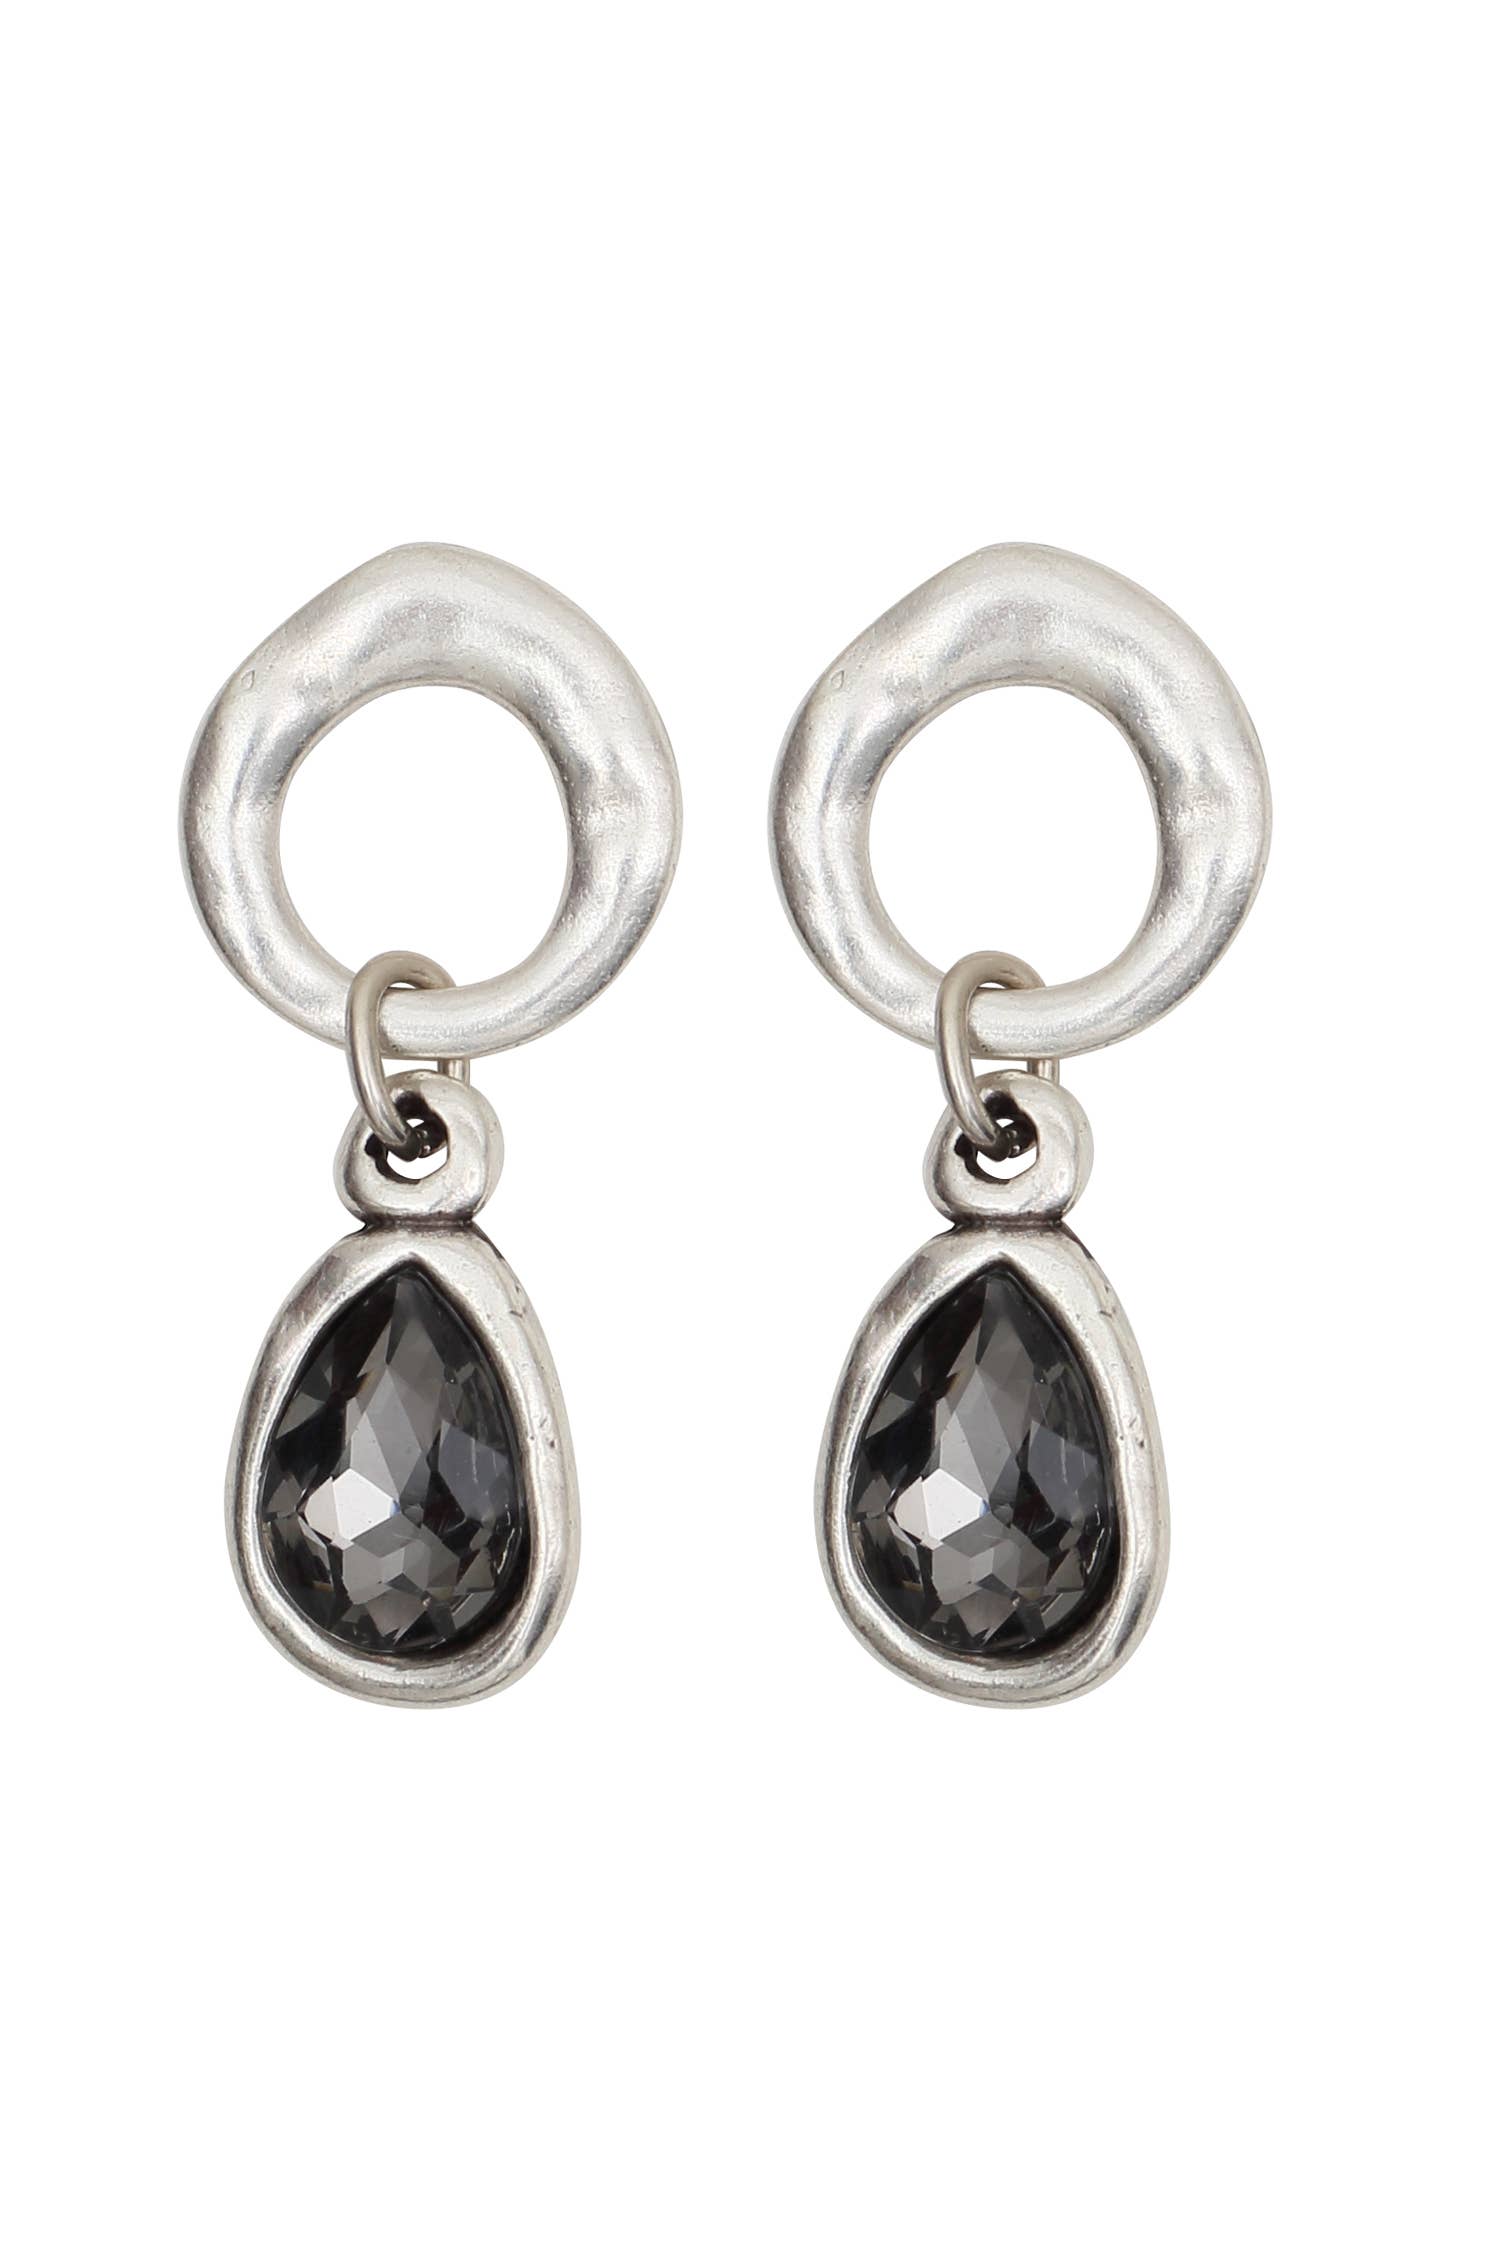 Handmade Pewter Earrings - NE1517 - Coco and lulu boutique 